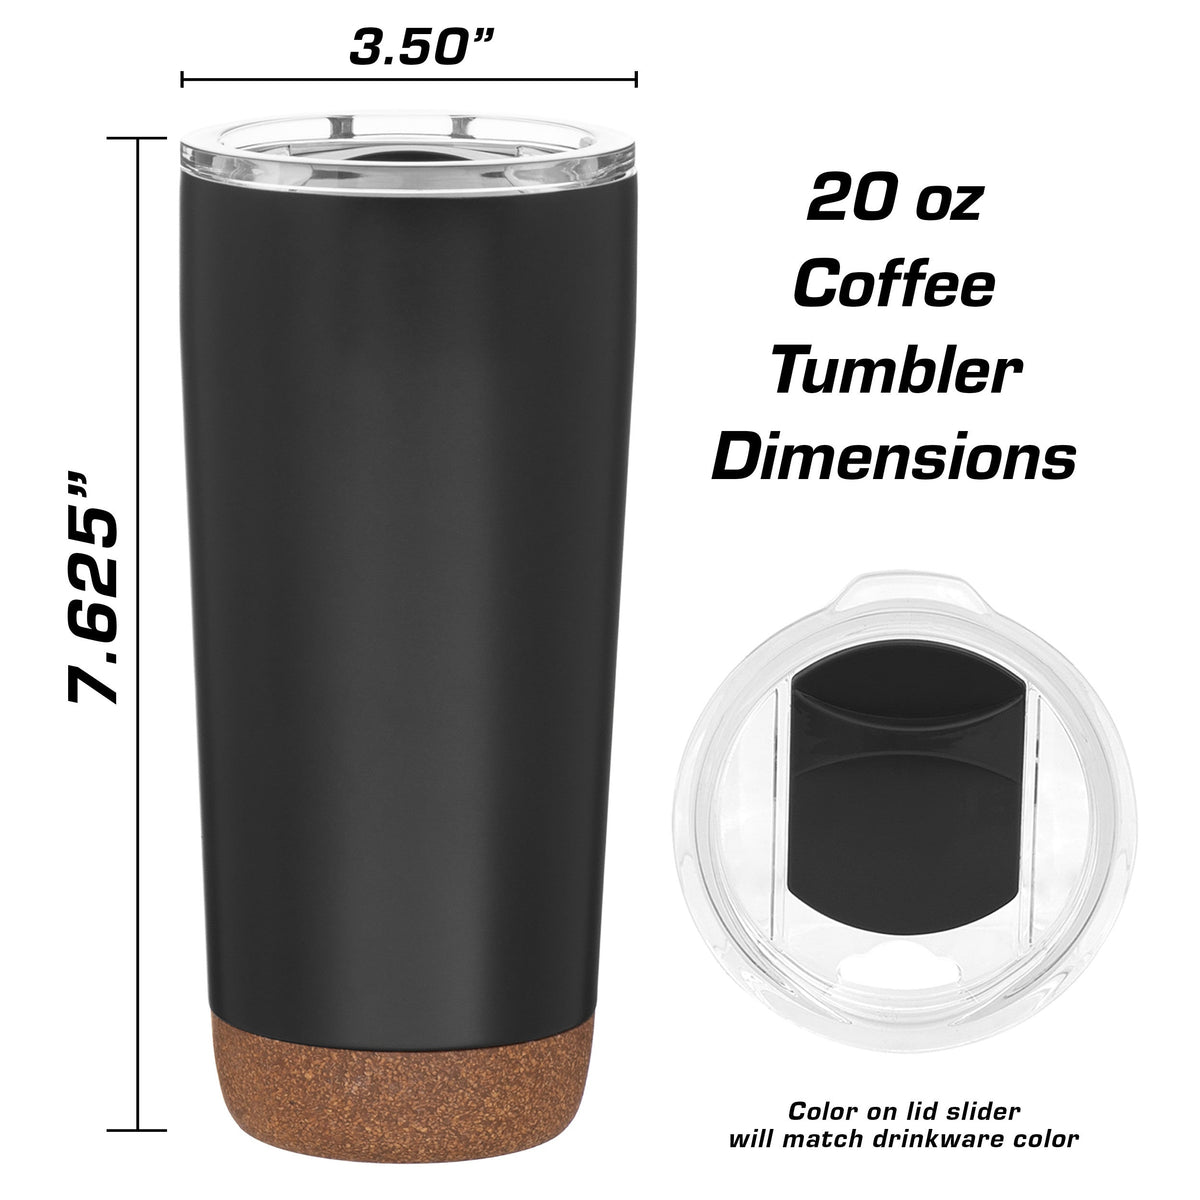 BMW 330 e46 Insulated Stainless Steel Coffee Tumbler - 20 oz